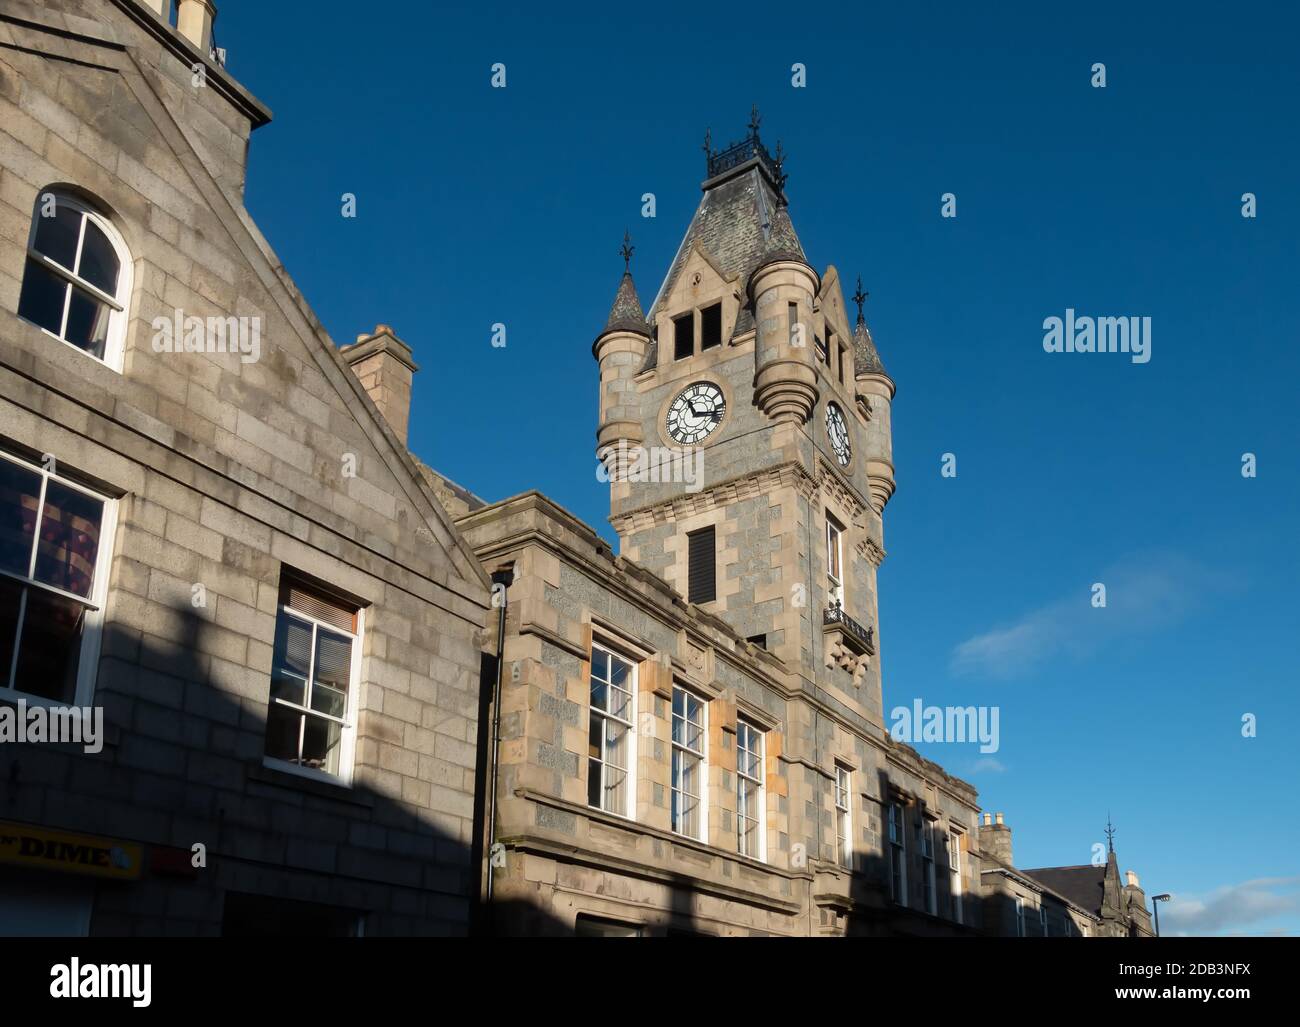 The townhose in the town of Huntly, Aberdeenshire, Scotland, UK Stock Photo